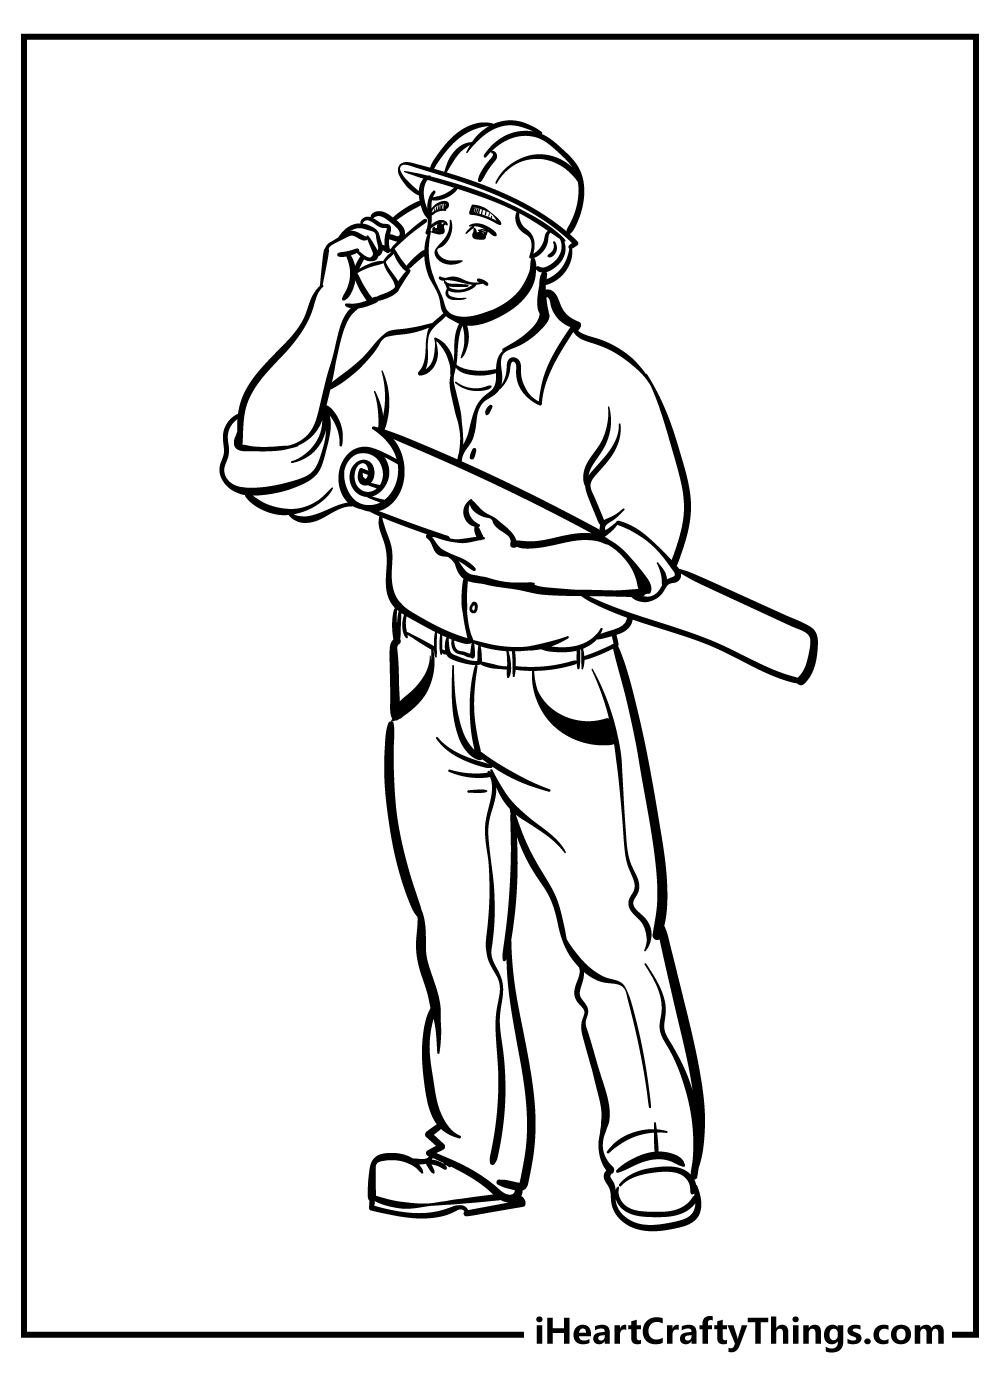 Construction coloring pages free printables